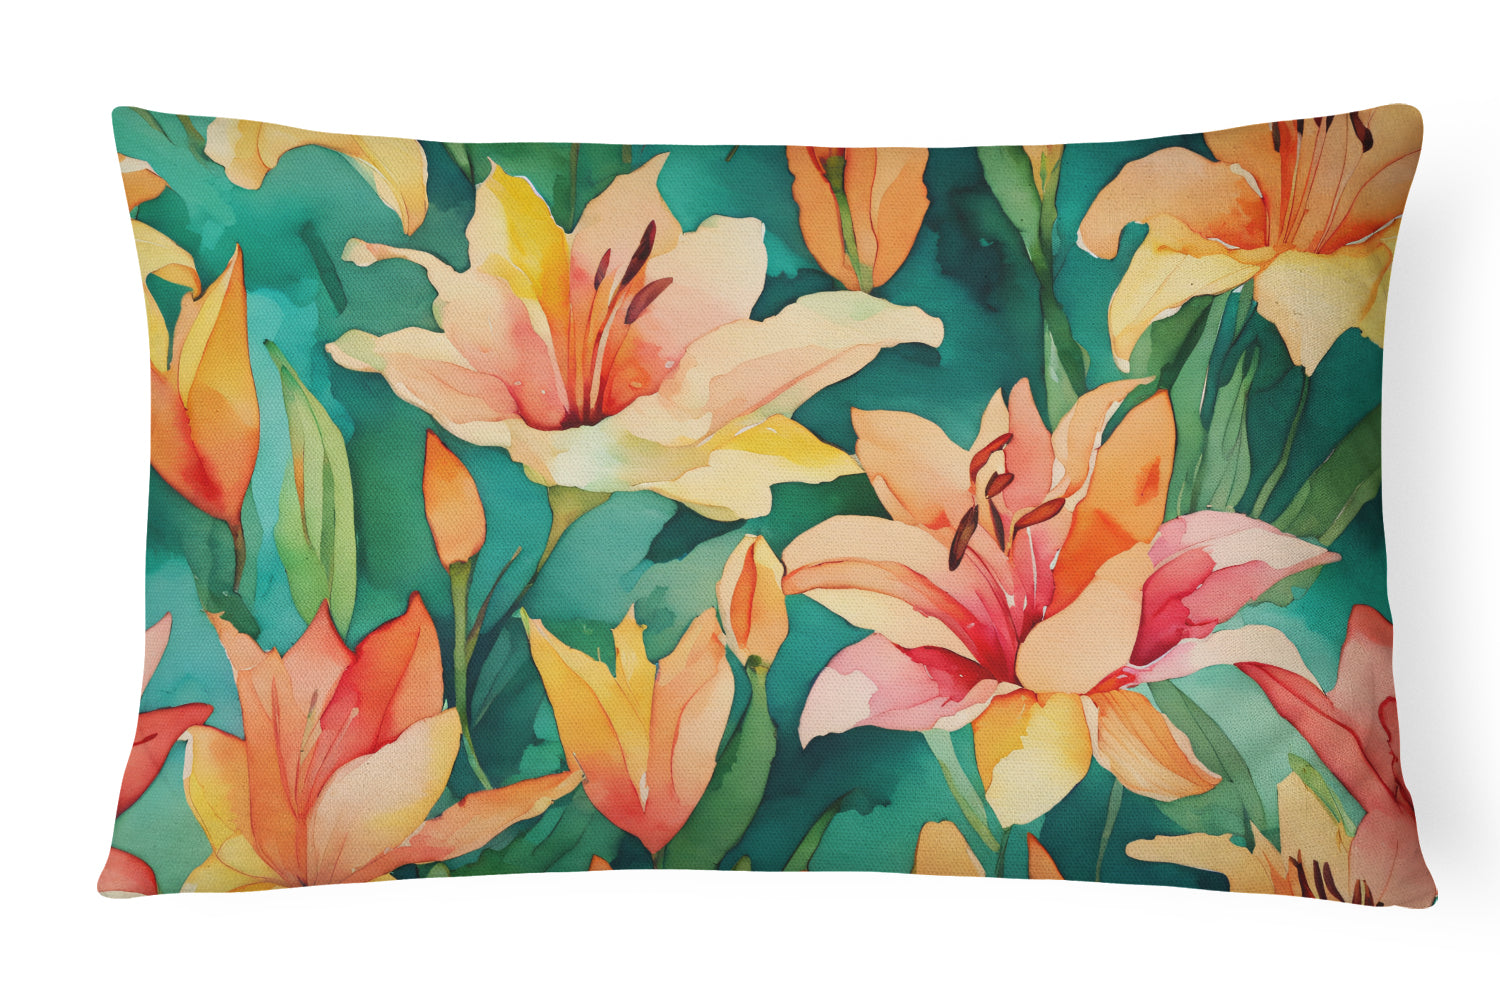 Buy this Lilies in Watercolor Fabric Decorative Pillow